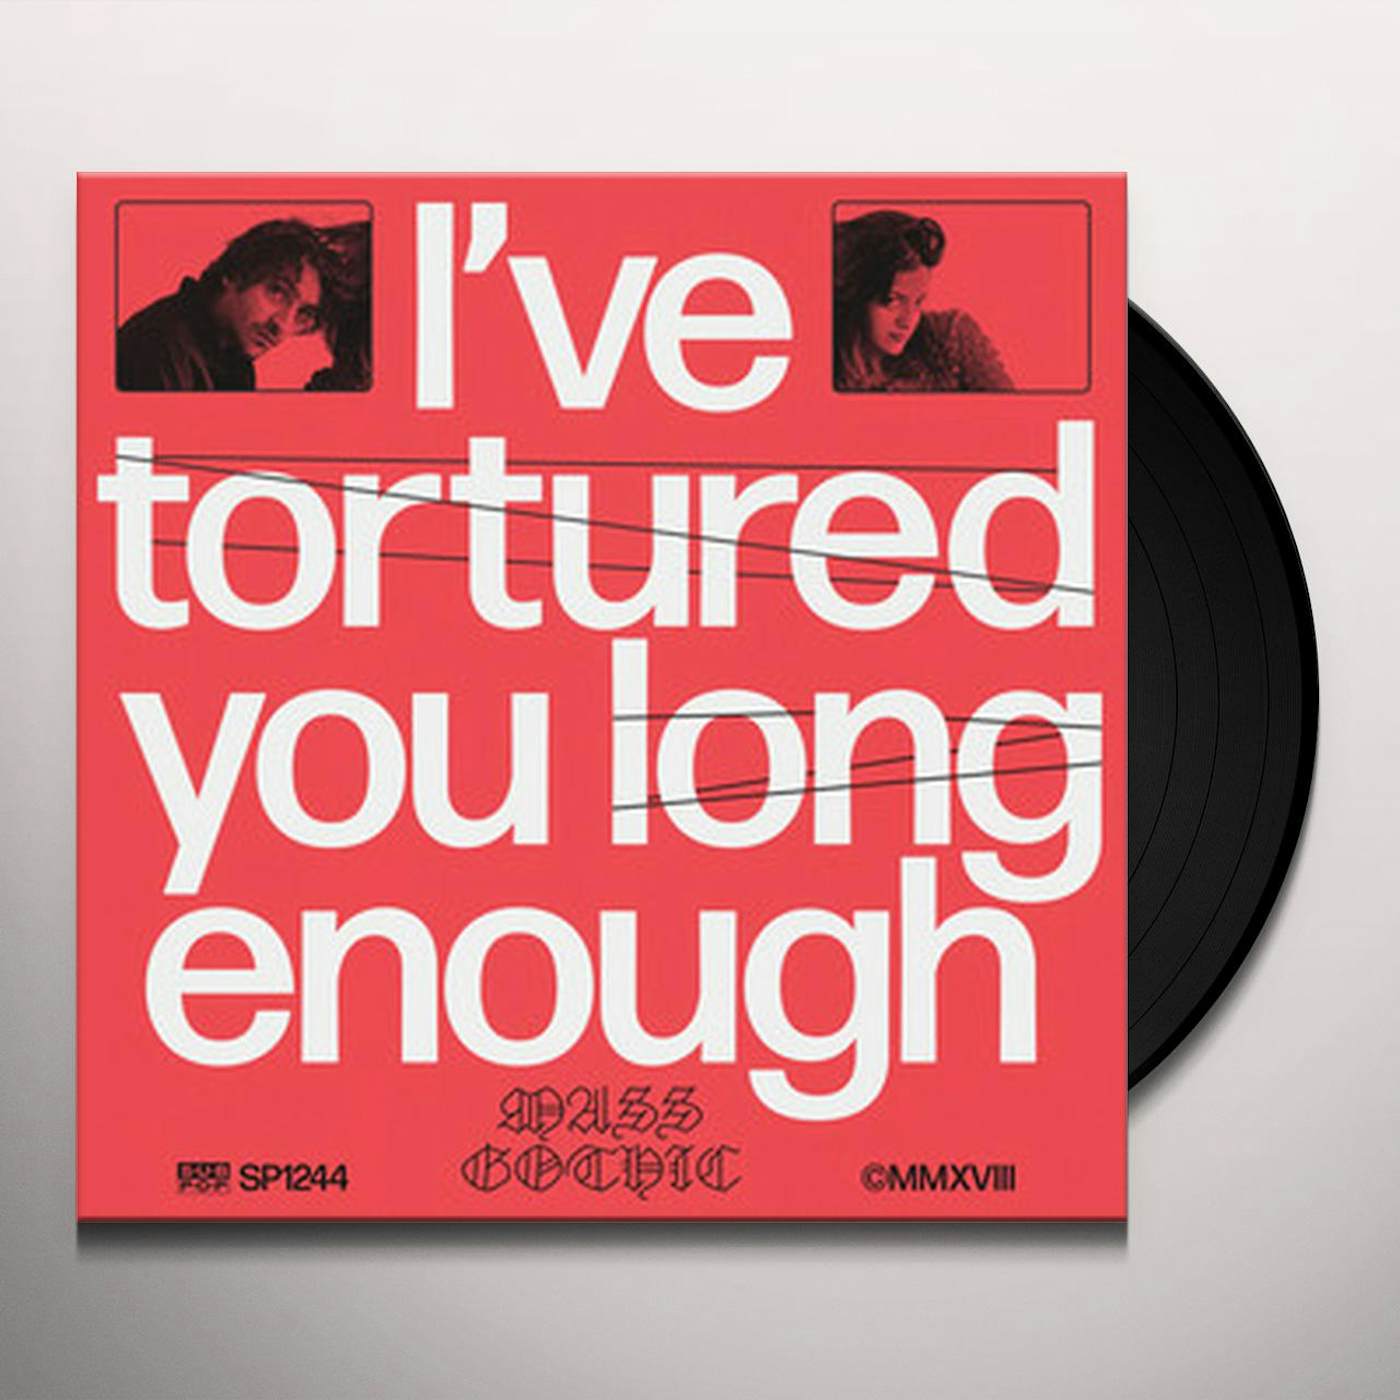 Mass Gothic I've Tortured You Long Enough Vinyl Record